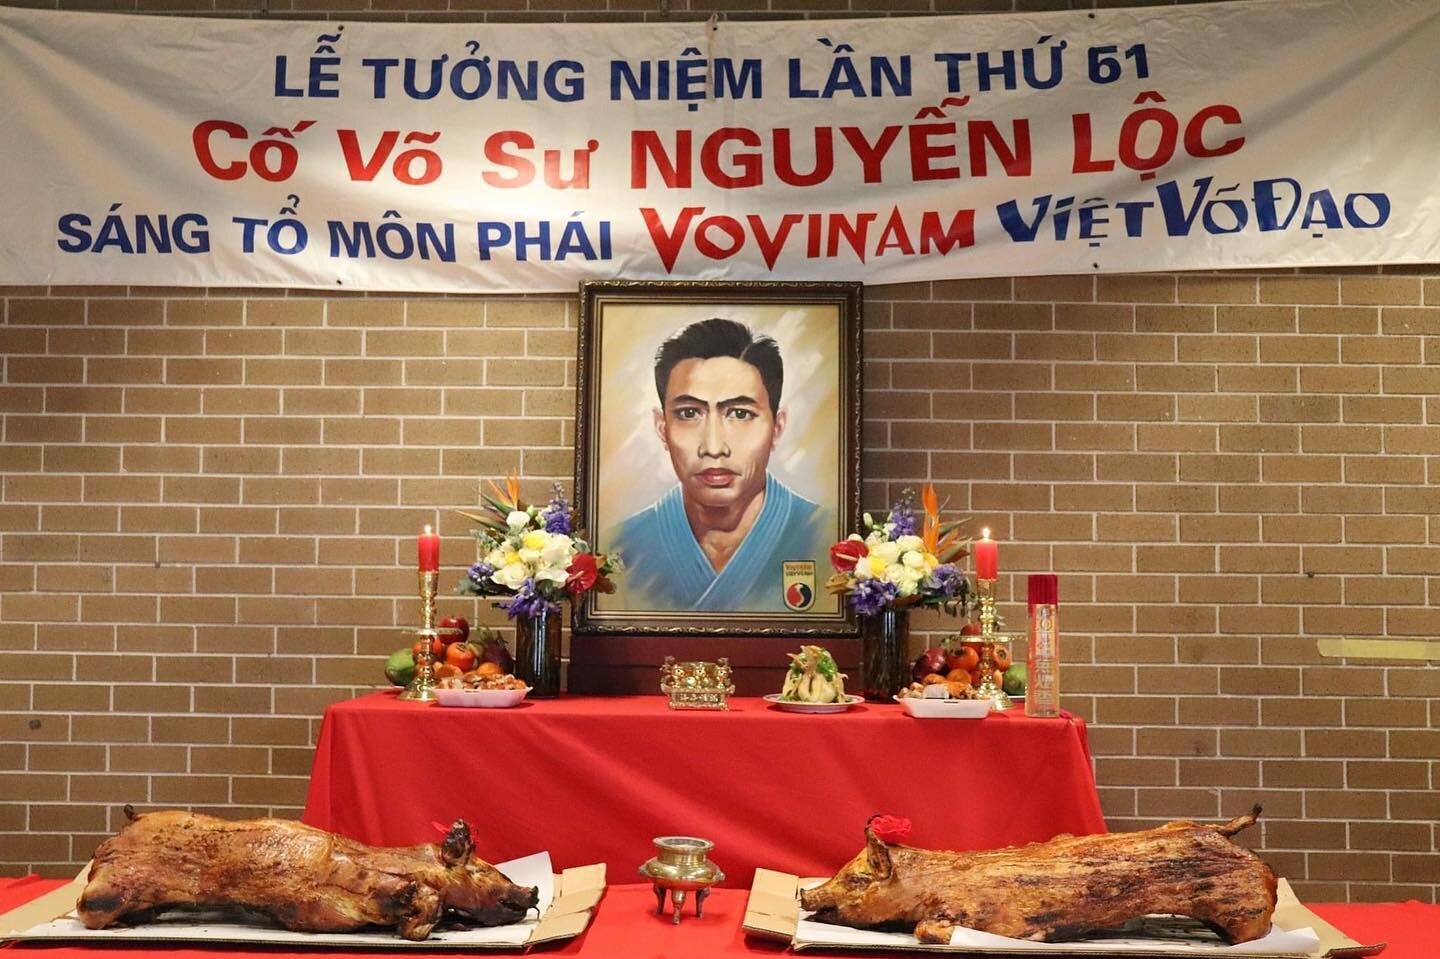 Tomorrow is our Gio To Ceremony for Founding Grandmaster Nguyen Loc and the Vovinam belt and pledge ceremony for NSW 2022. 

It will be the 62nd annual commemoration. 

All are welcome to pay your respects, get to know the history and culture of Vovi